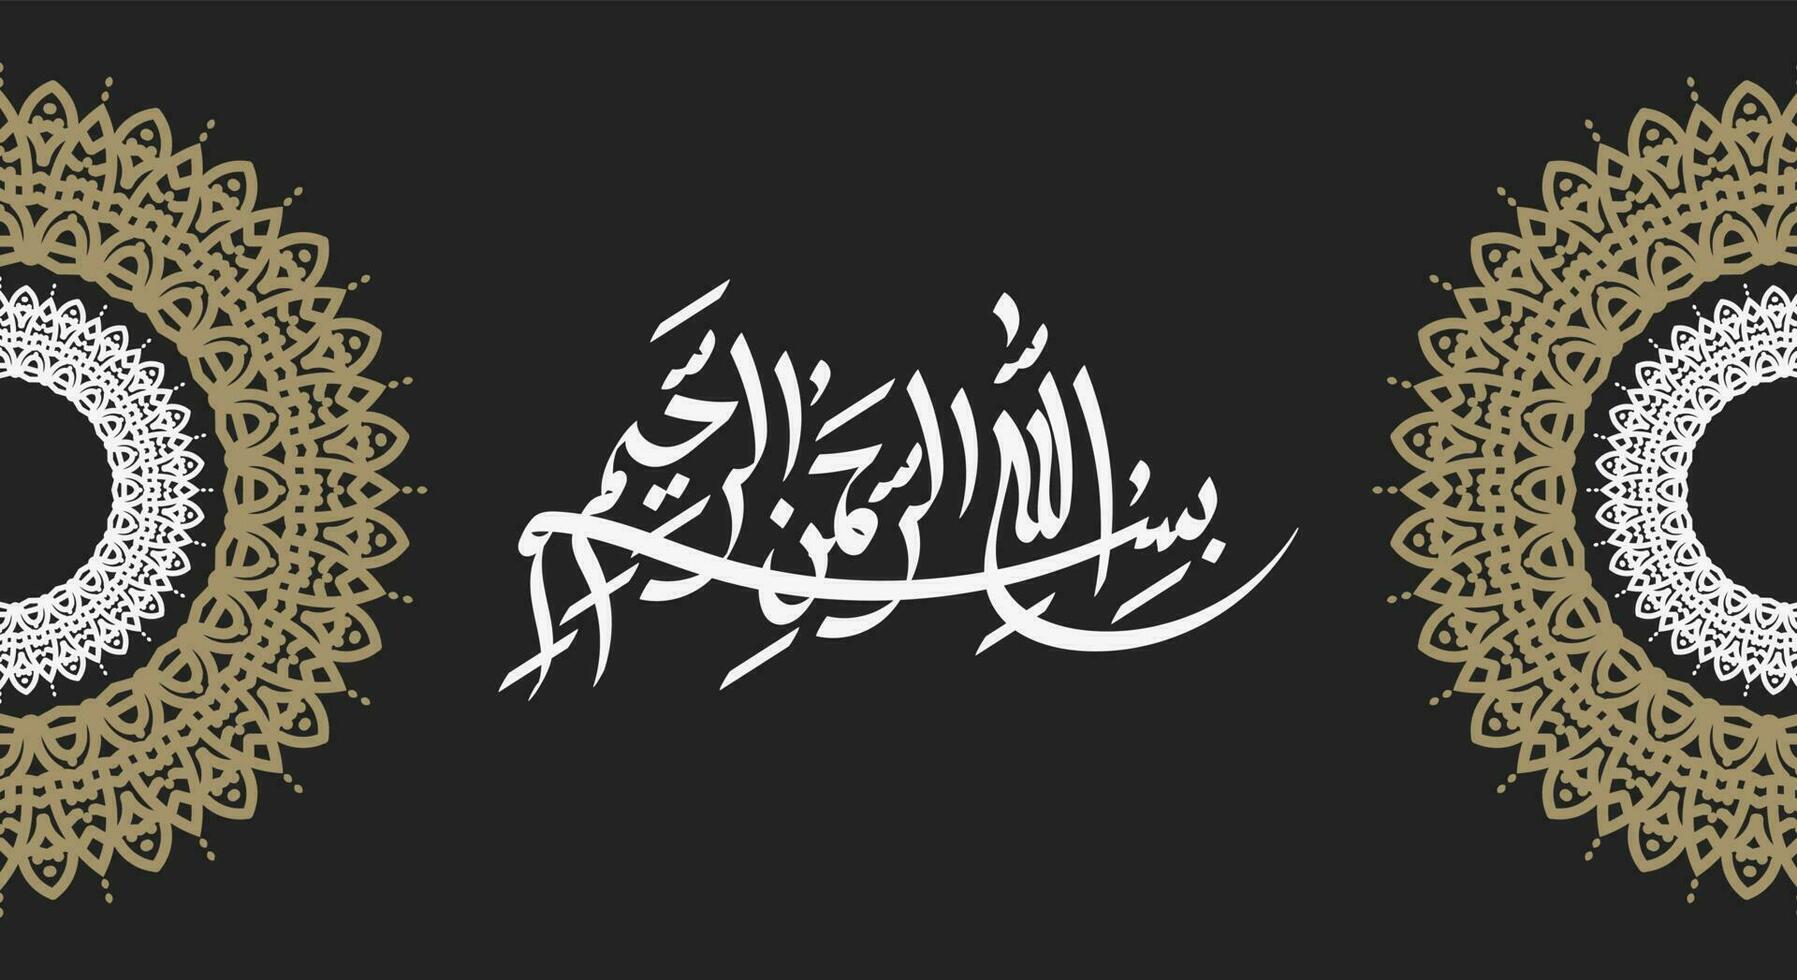 bismillah Written in Islamic or Arabic Calligraphy with retro color. Meaning of Bismillah, In the Name of Allah, The Compassionate, The Merciful. vector